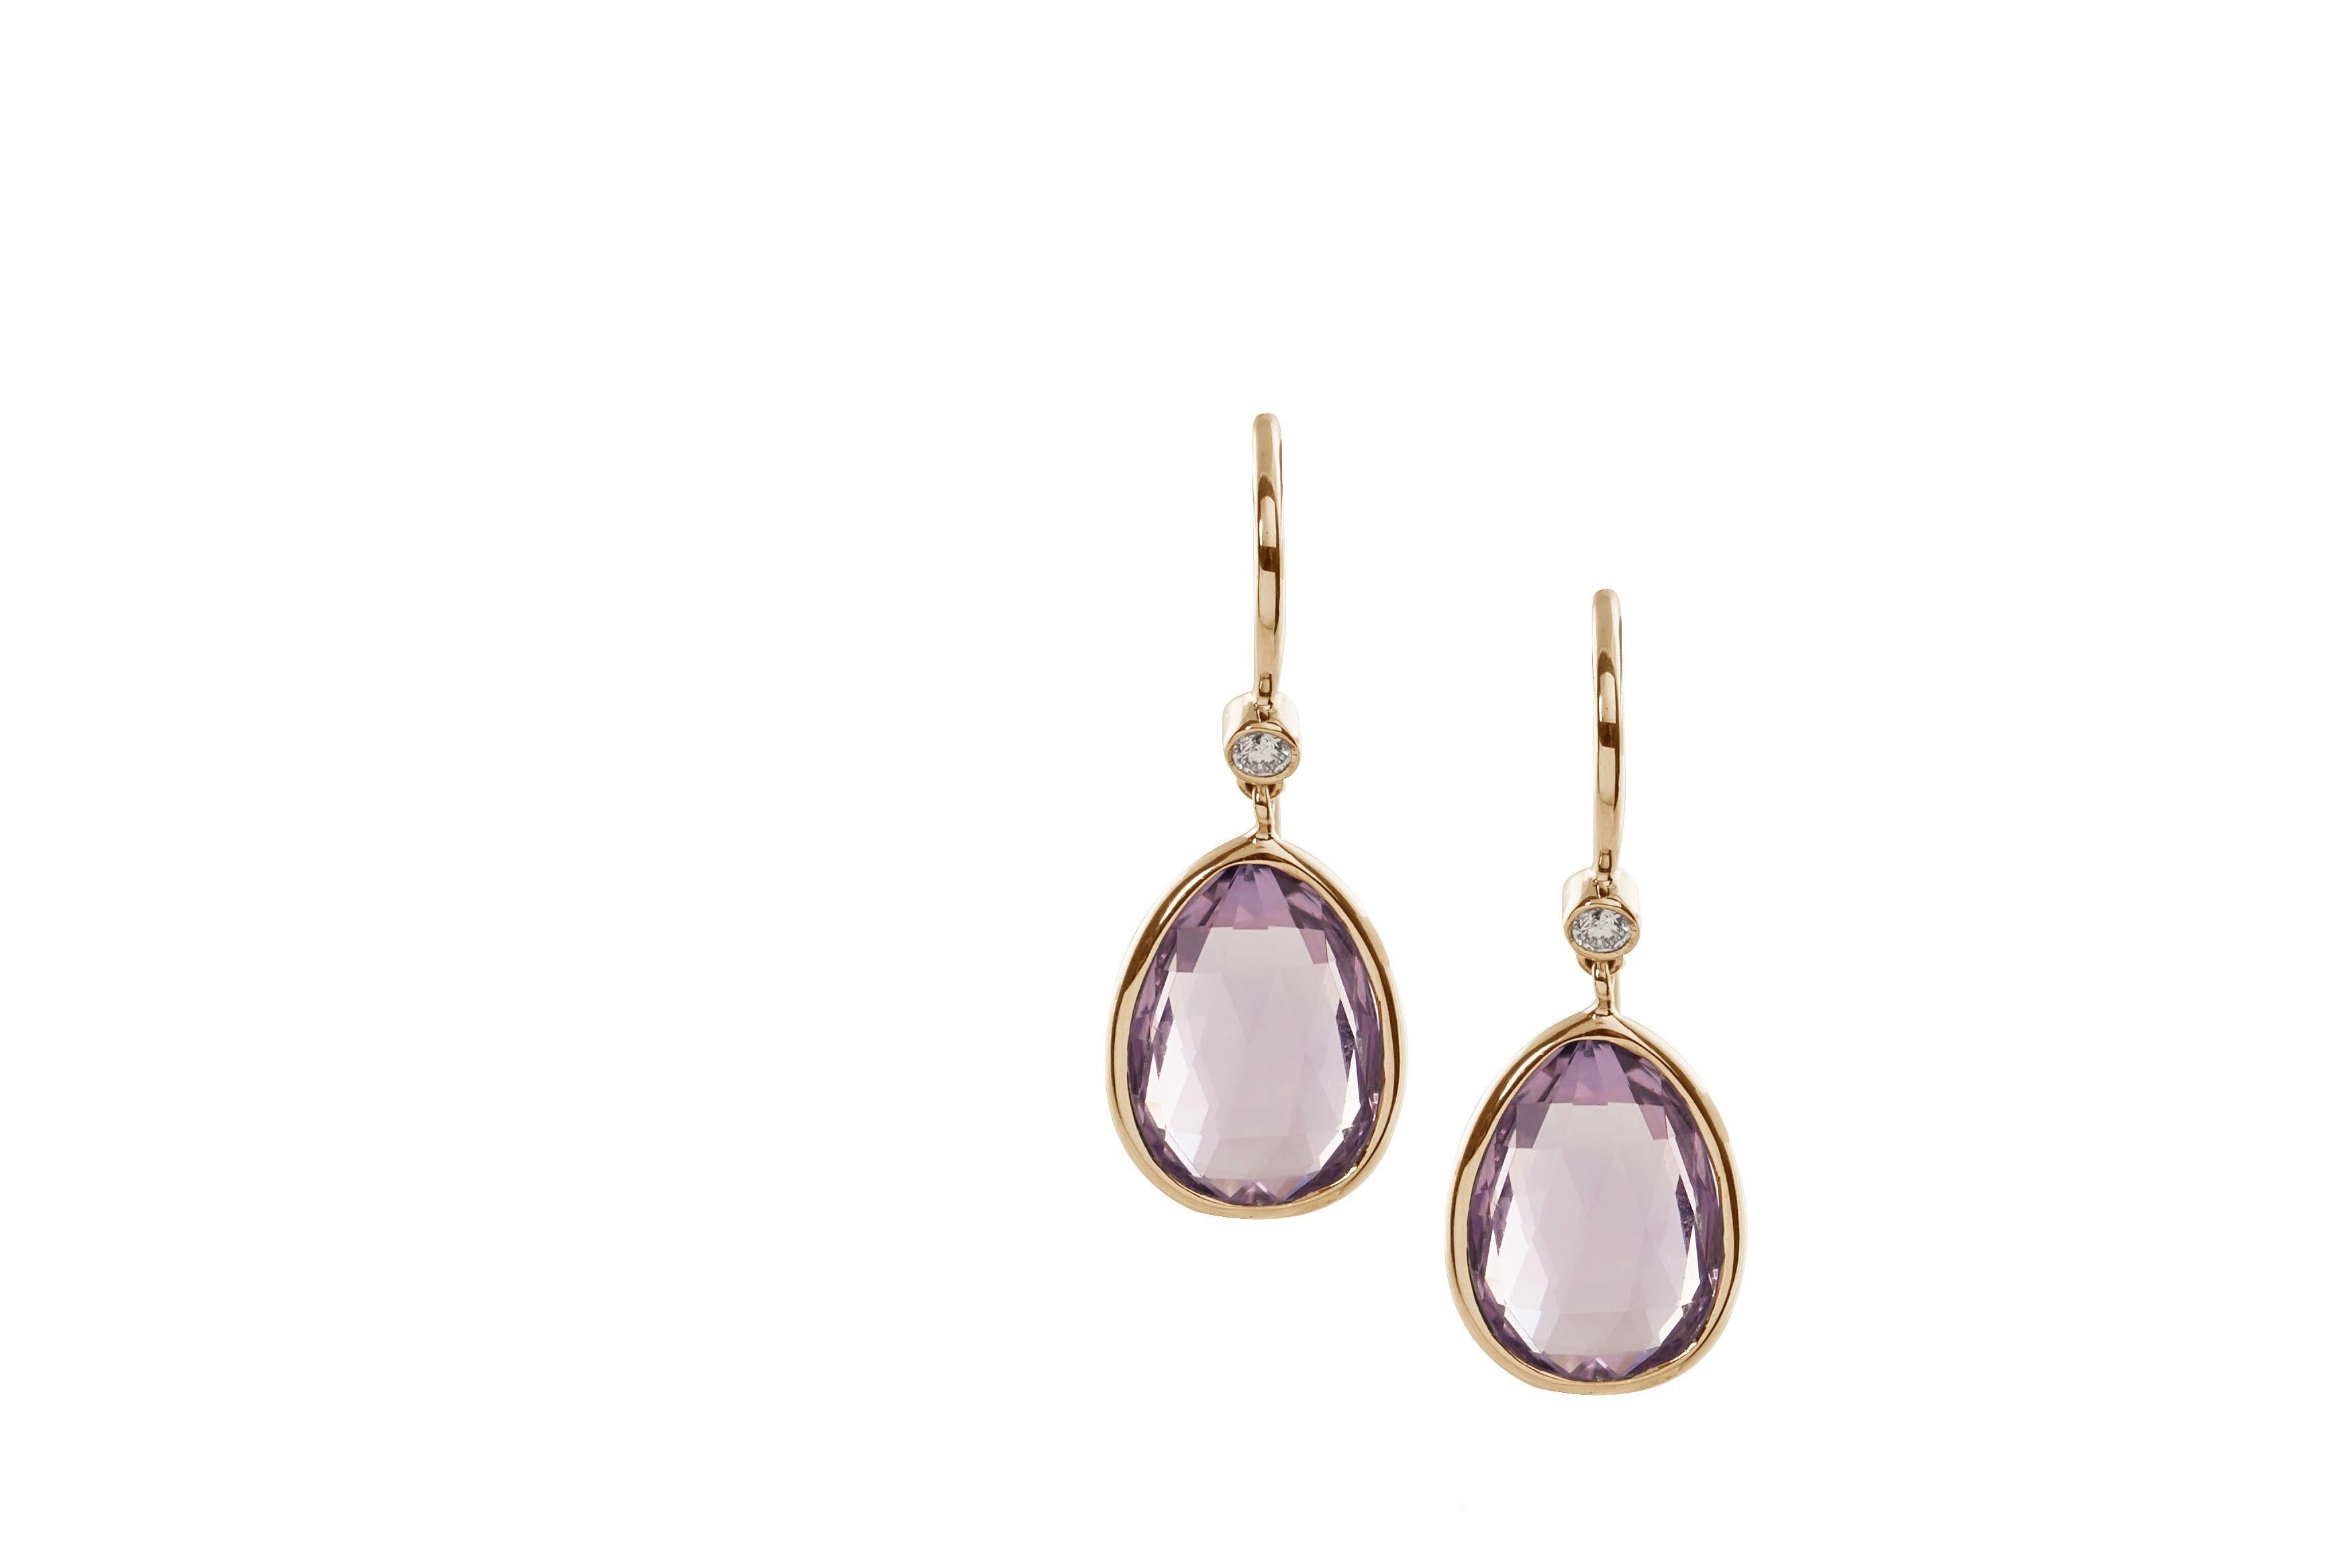 Lavender Amethyst Pear Shape Briolette with Diamond Earrings in 18K Yellow Gold, from 'Gossip' Collection

Stone size: 14 x 10 mm

Gemstone Approx Wt: Lavender Amethyst - 10.04 Carats

Diamonds: G-H / VS, Approx Wt 0.9 Carats 